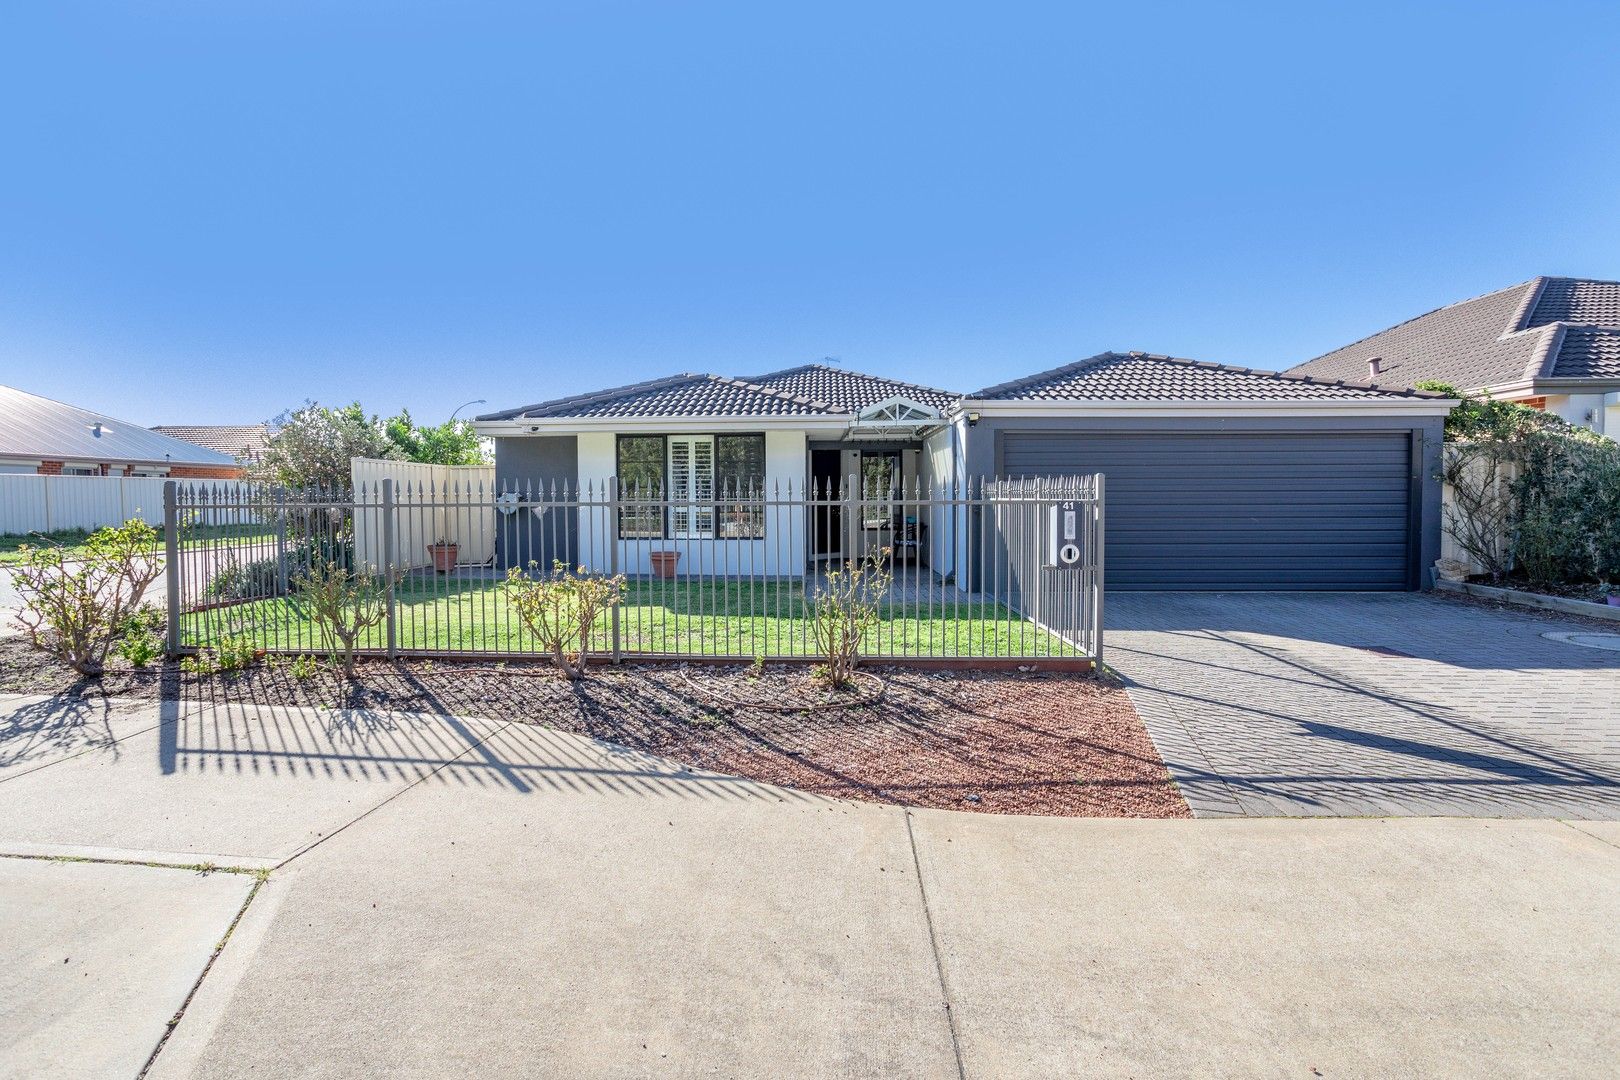 4 bedrooms House in 41 Ralphs Street SEVILLE GROVE WA, 6112